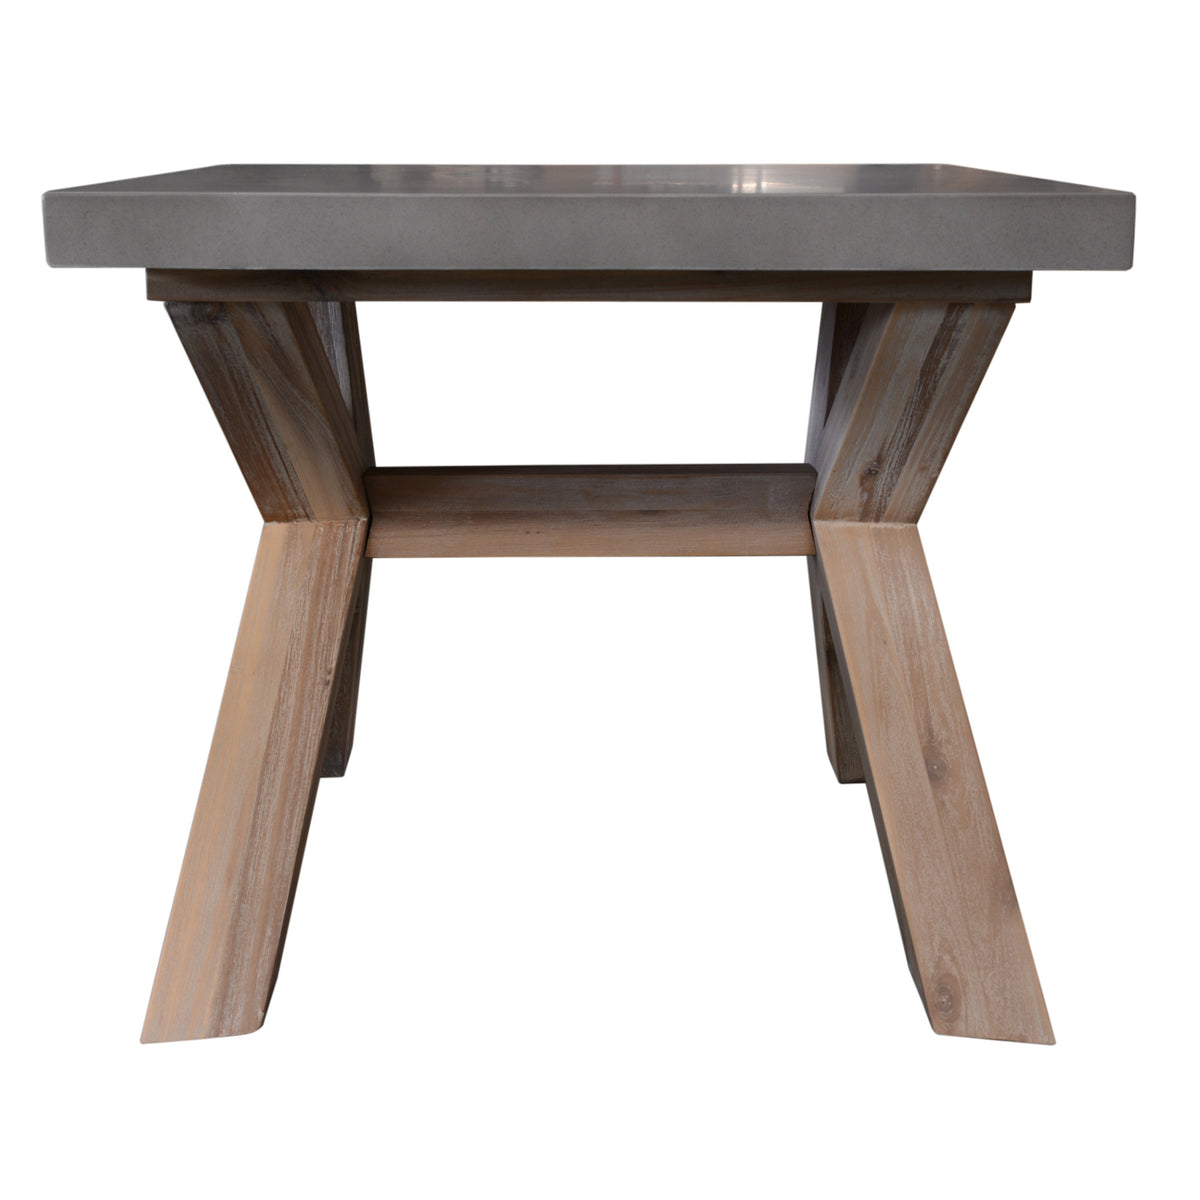 Stony Lamp Table with Concrete Top Grey 60cm - Square